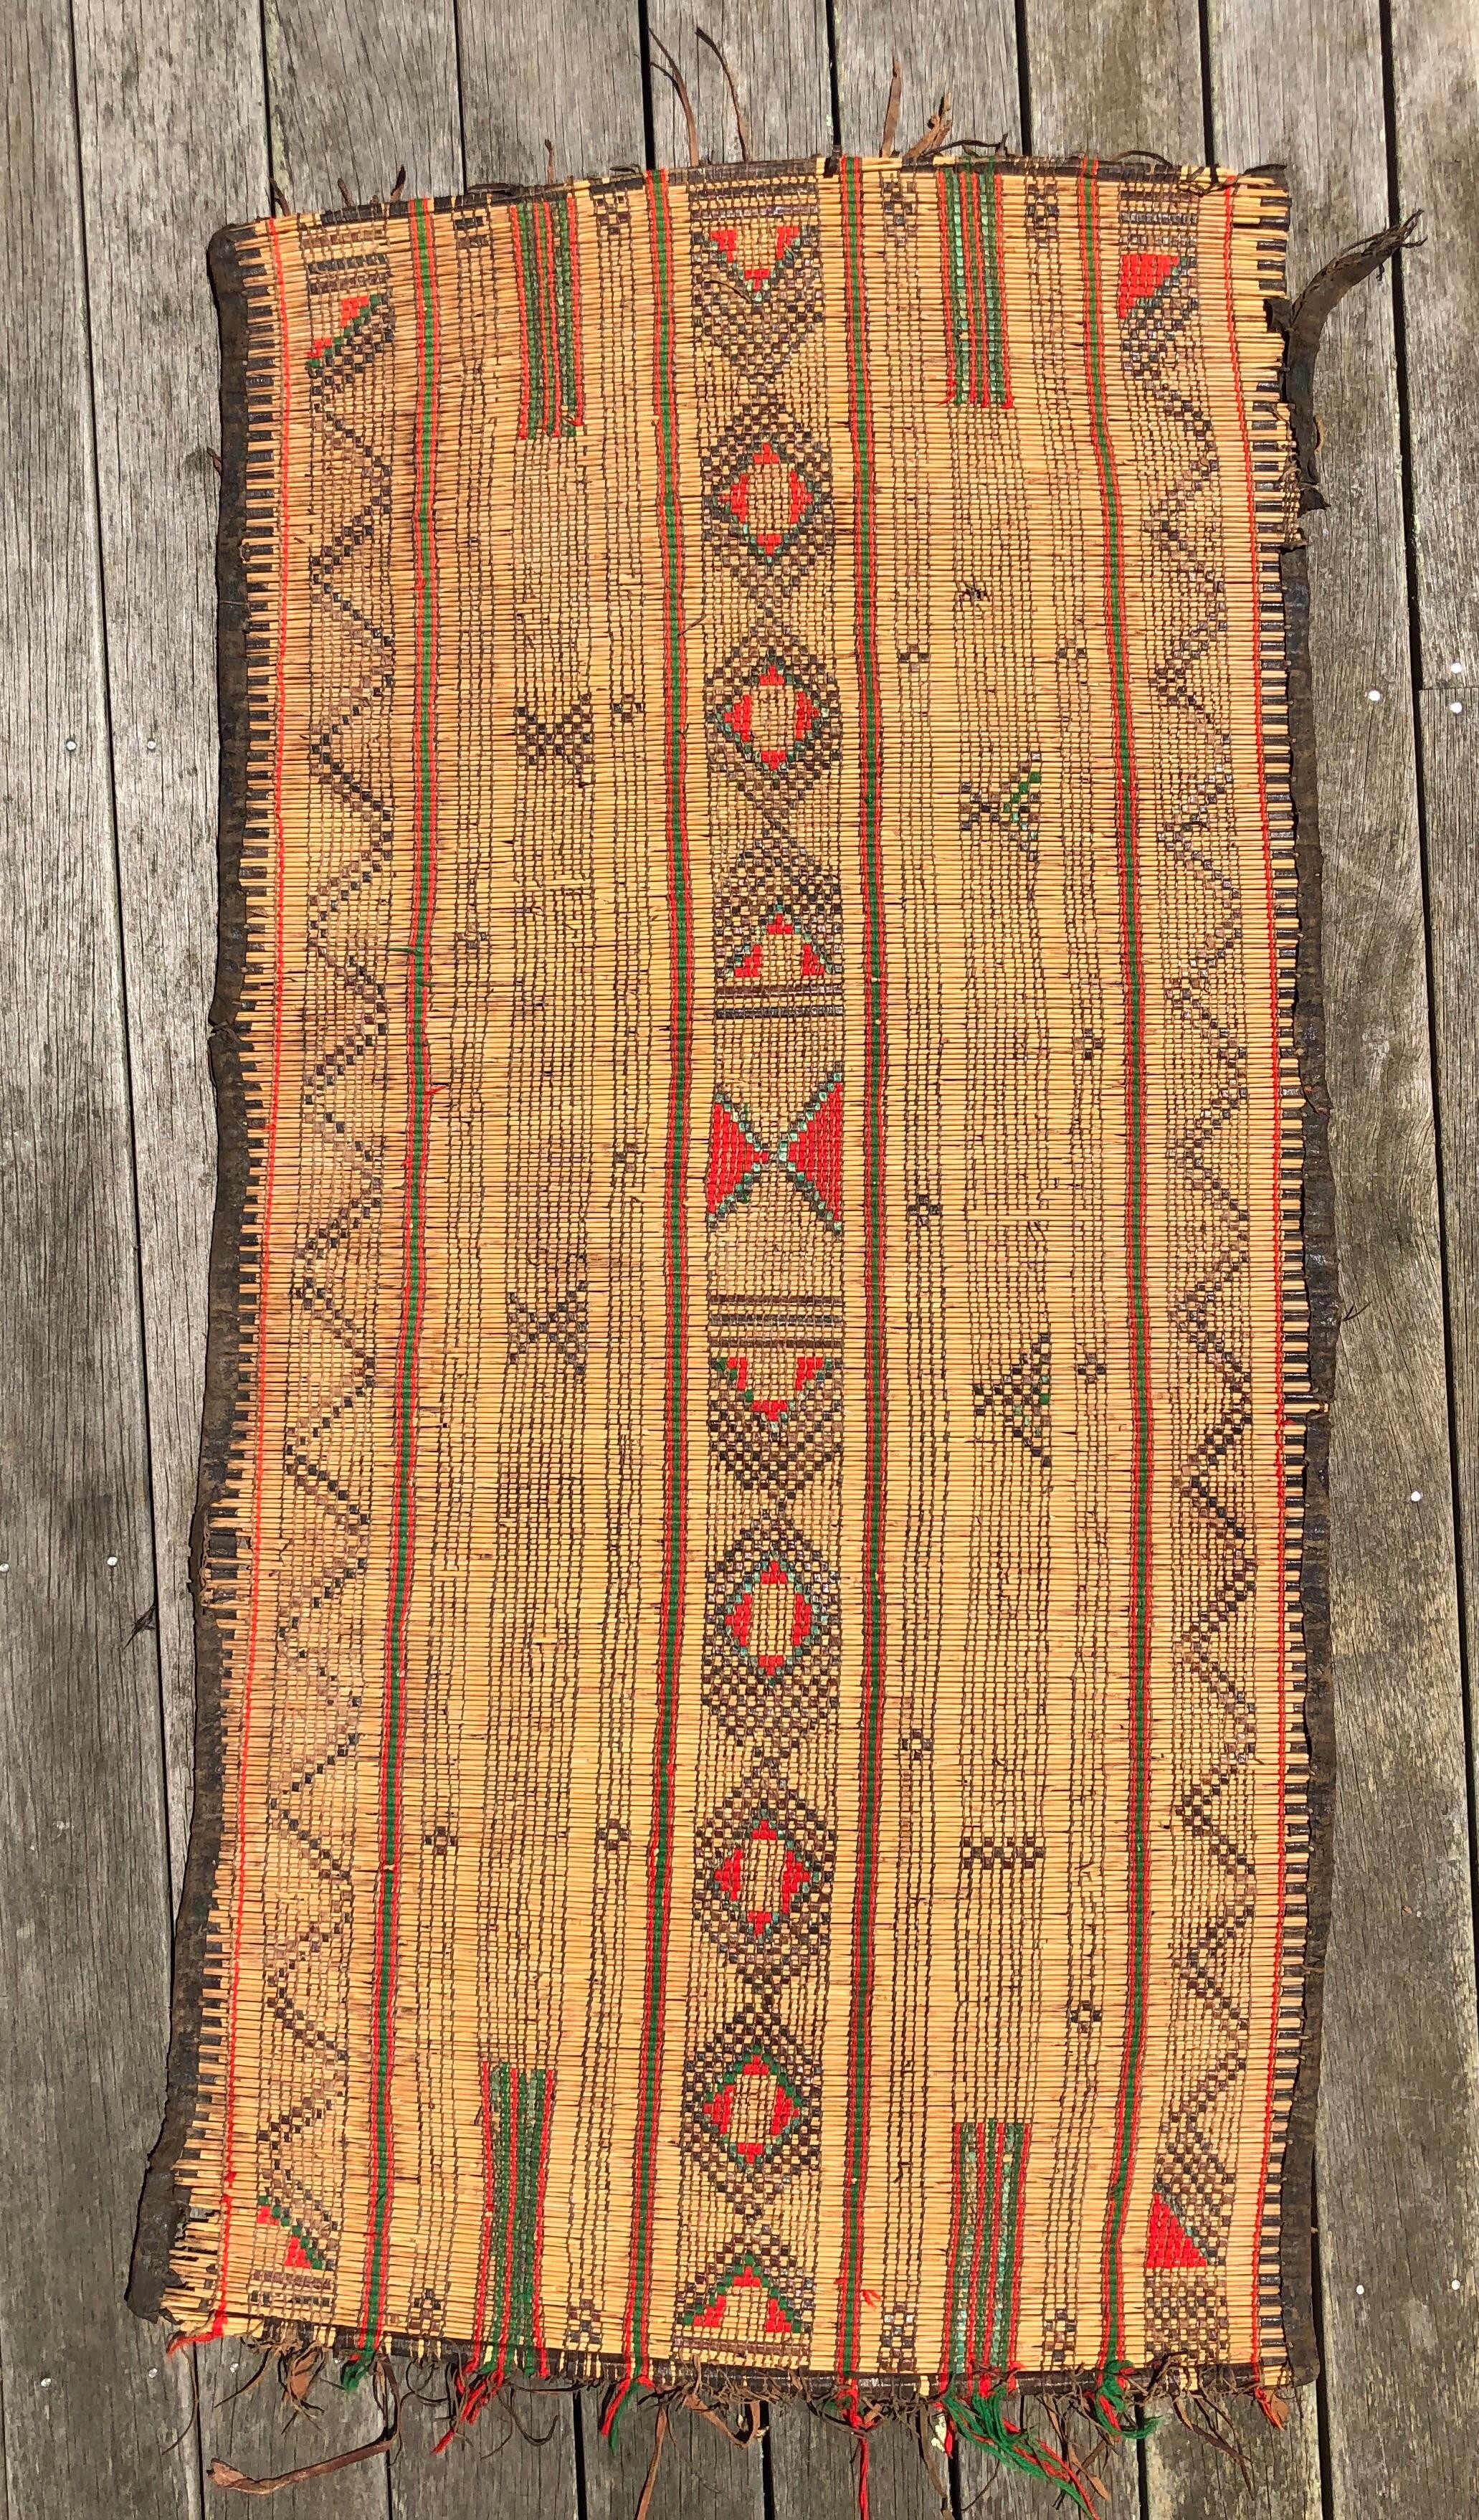 This vintage Tuareg Mat rug was fastidiously made by hand in the early years of the 20th century. Using local reeds and other natural materials and dyes, these mats are woven and then decorated using leather strands. Made in the first years of the